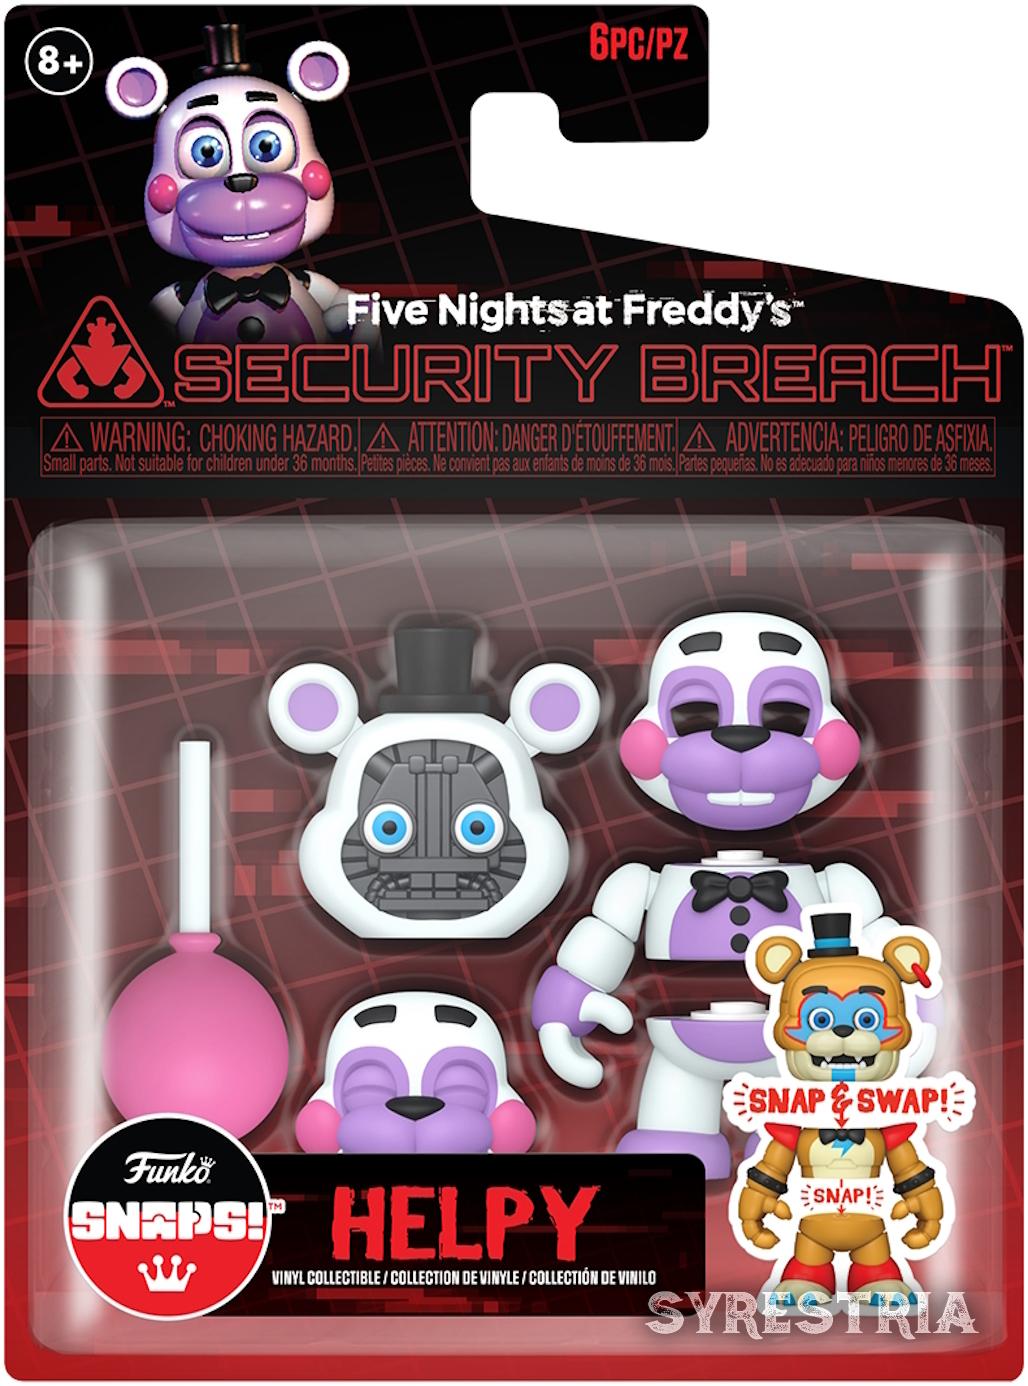 Five Nights at Freddy's - Helpy   Snaps! - Funko Vynl Figur Snaps!